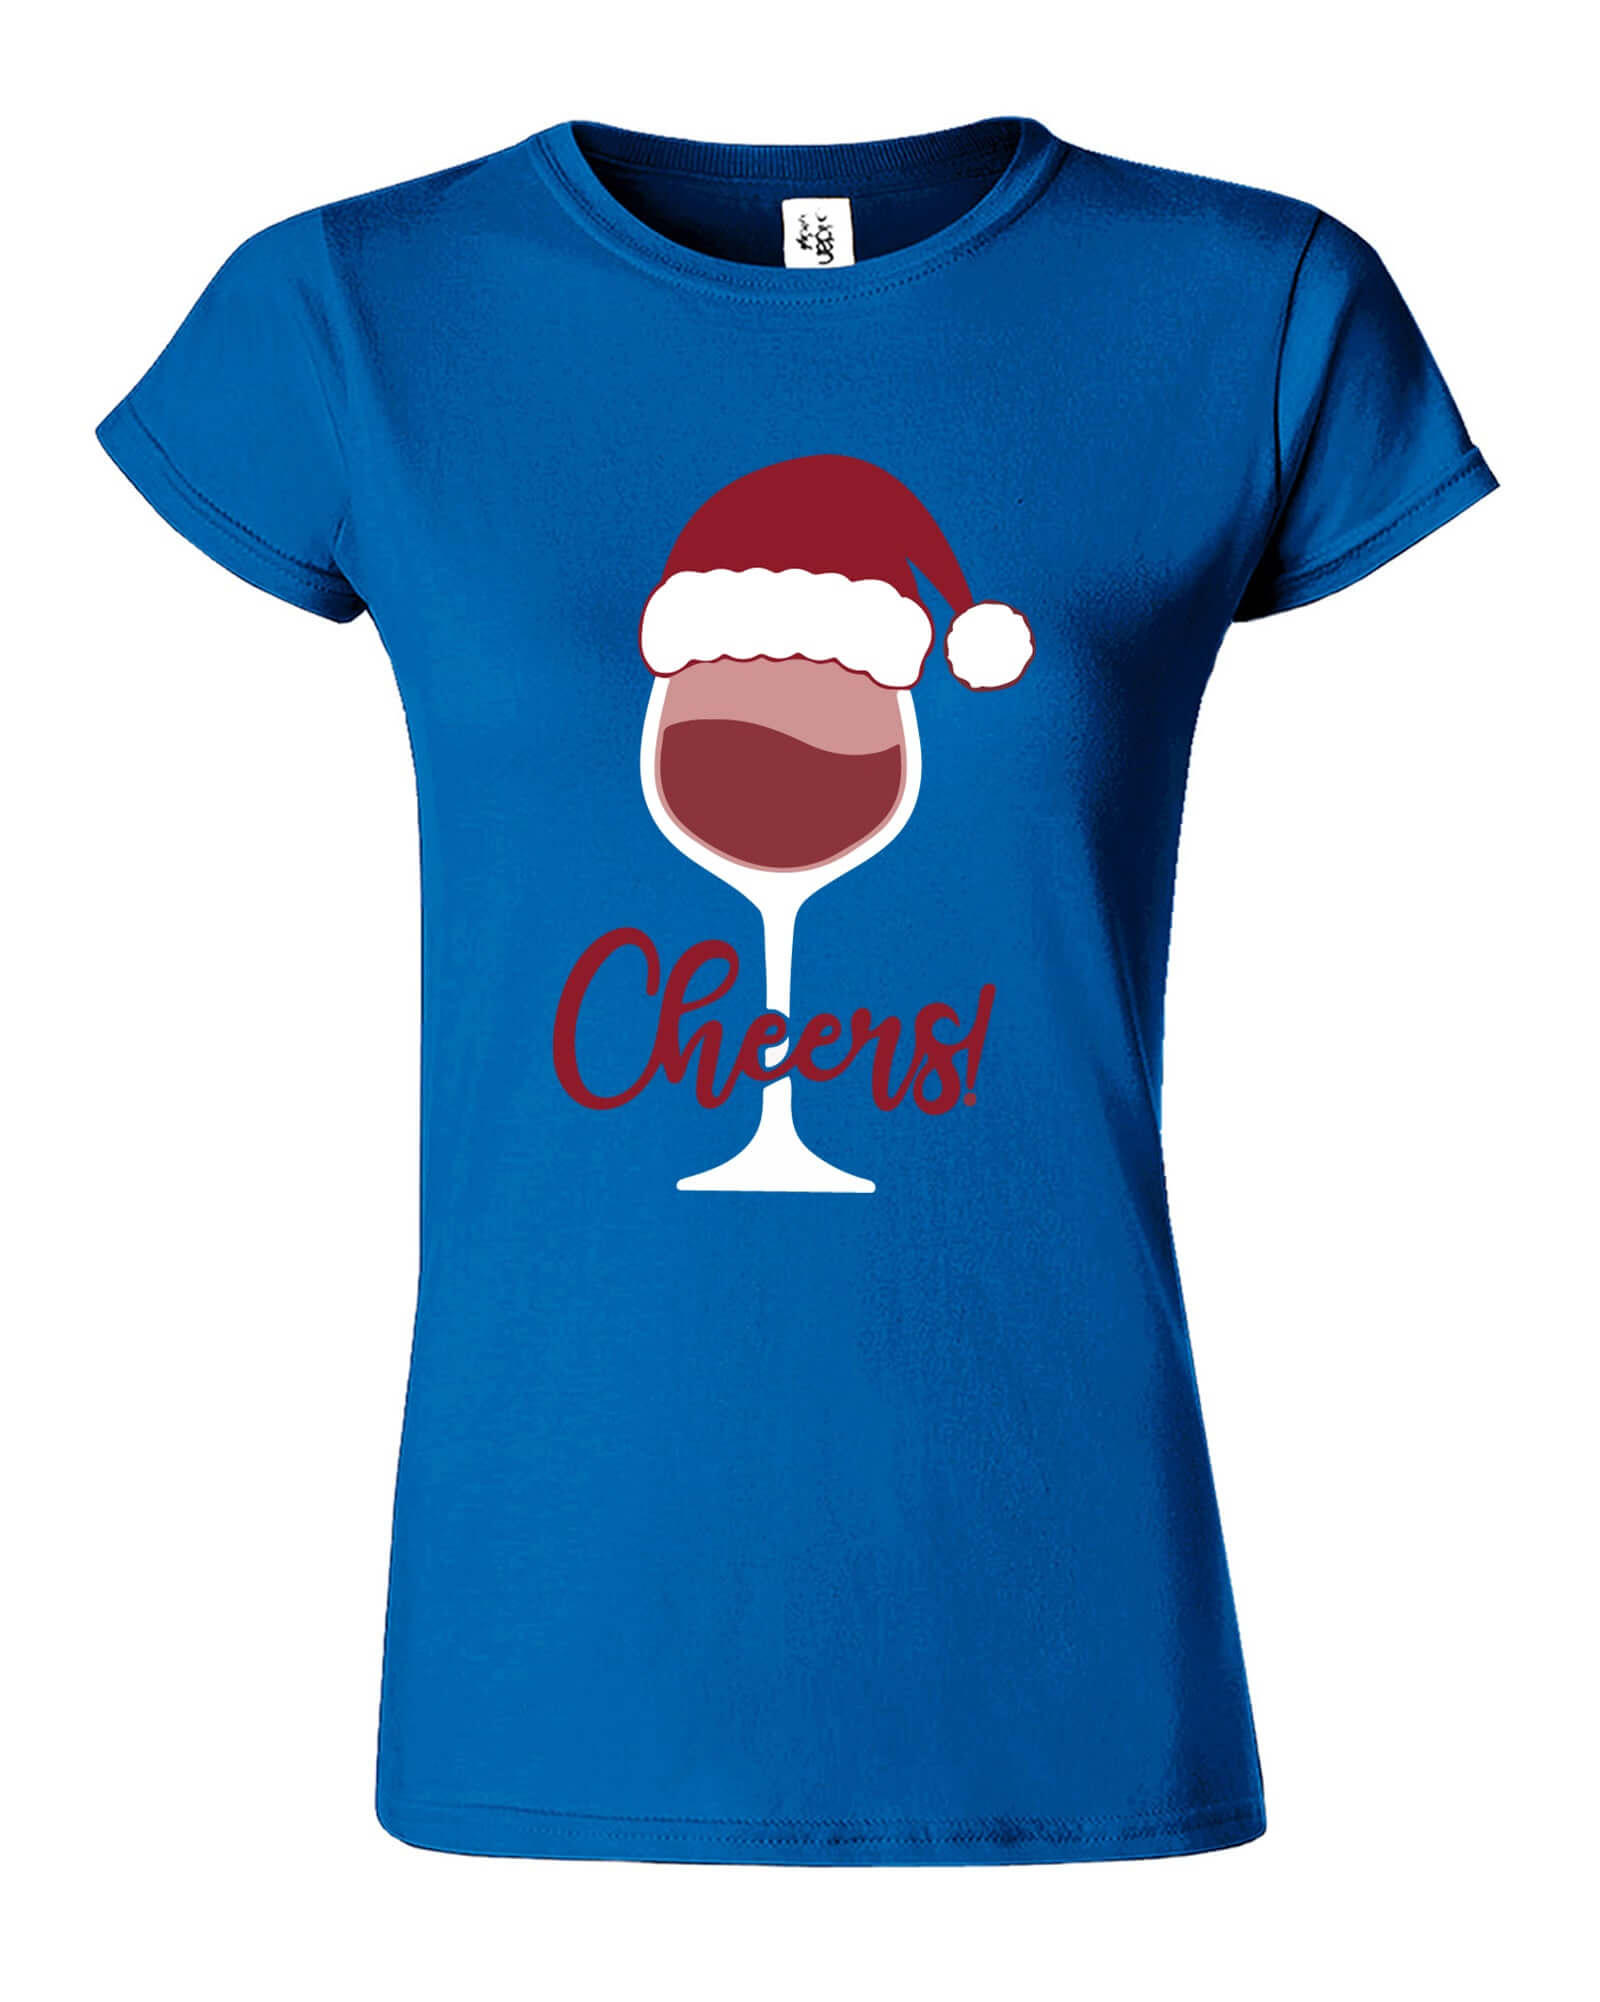 Cheers Christmas Funny Womens T-Shirt - ApparelinClick